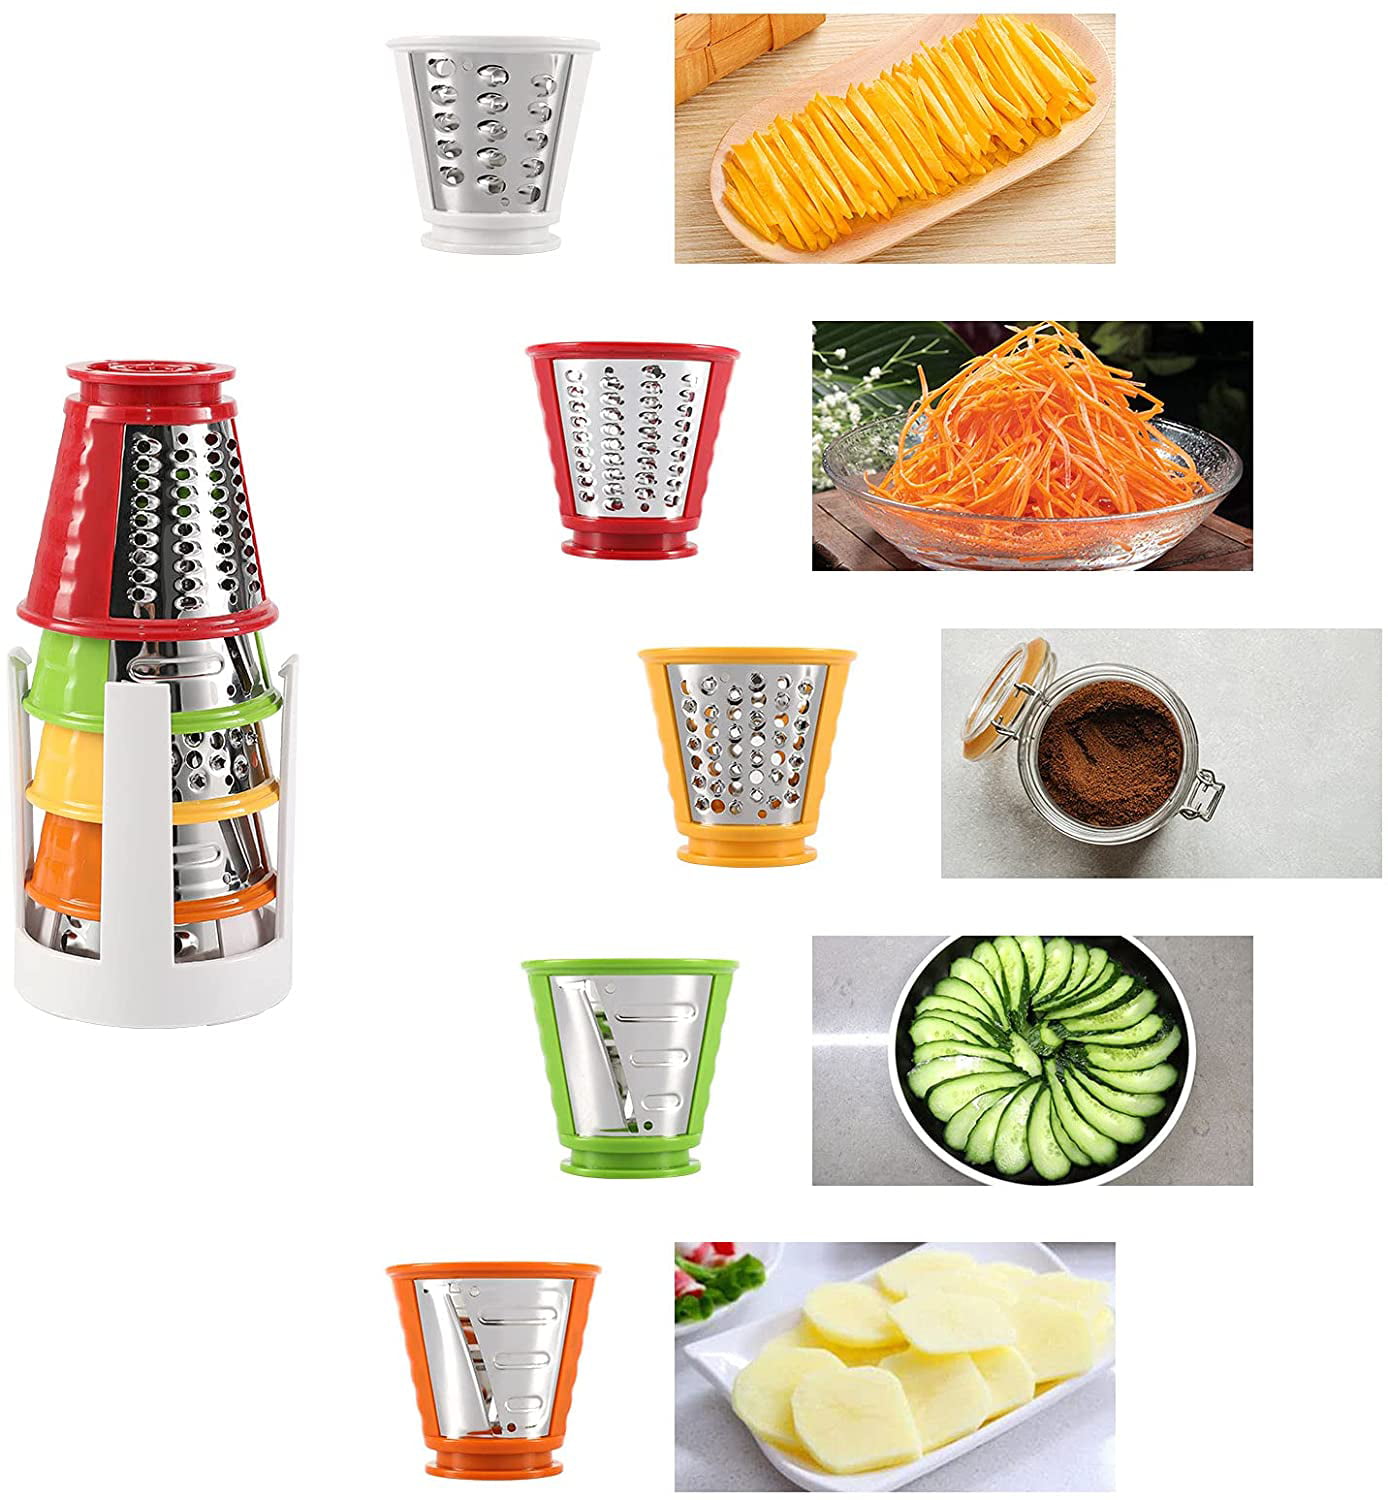 Plohee Electric Slicer Shredder Salad Shooter - 150W One-Touch Control  Cheese Shredder, Fruits Vegetable Cutter Cheese Grater with 5 Attachments  for